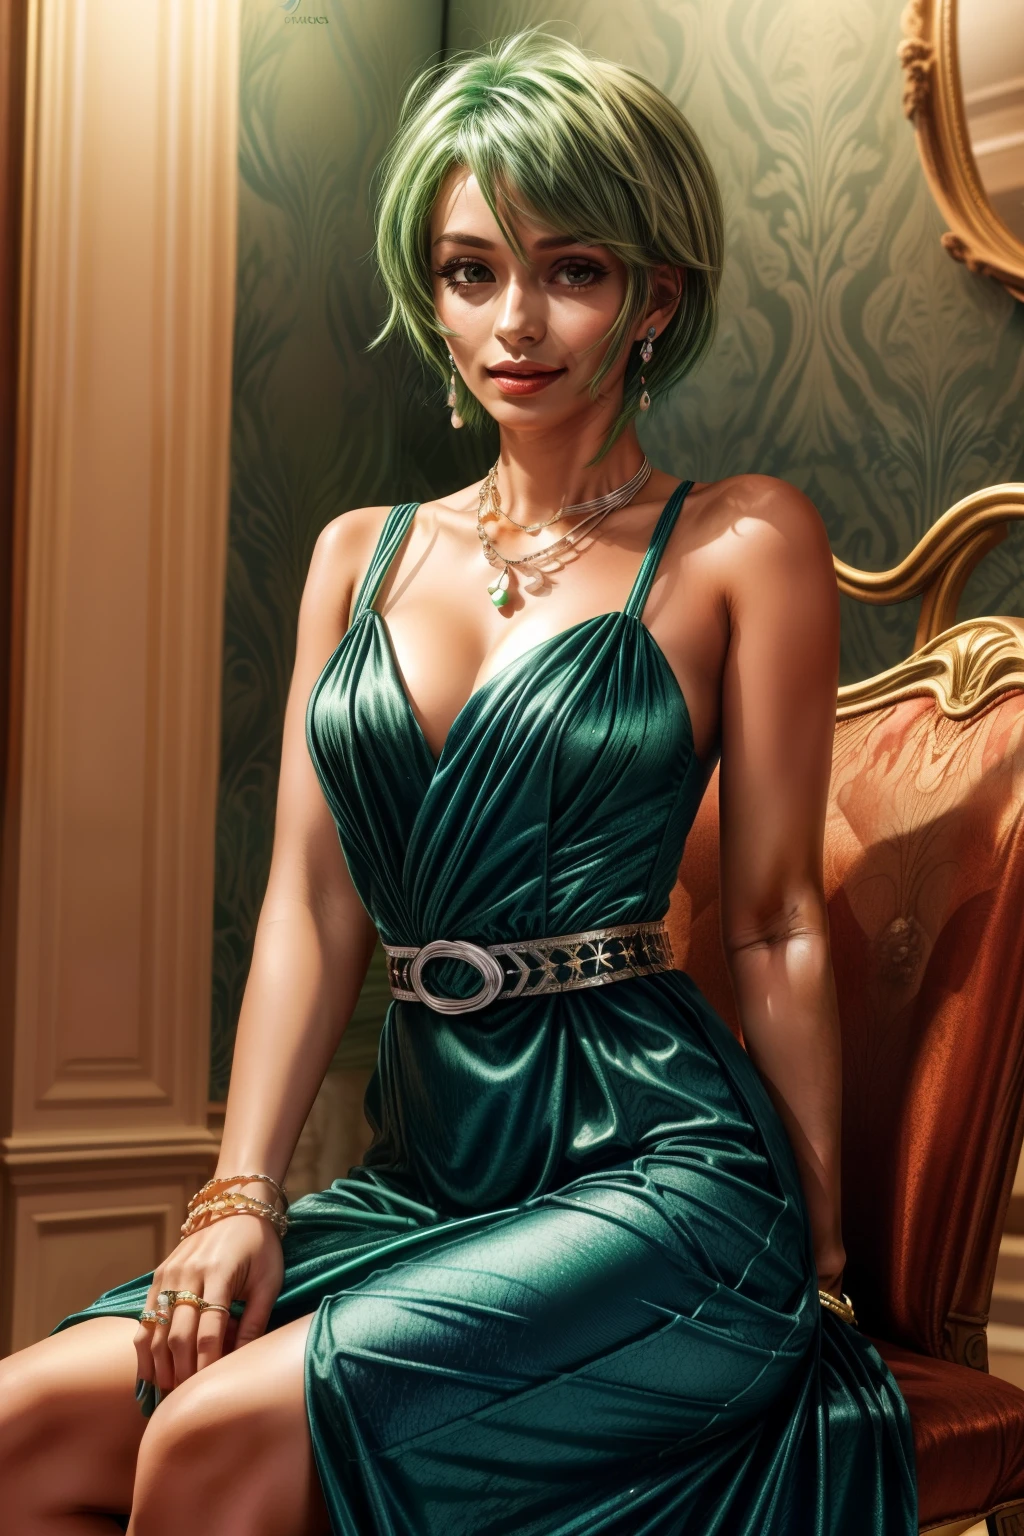 Frederica Greenhill, 25 years old, shortcut, green hair, wearing a Blue evening dress at a high class restaurant, sitting on chair , earrings, necklace, ring, bracelet, chain belt